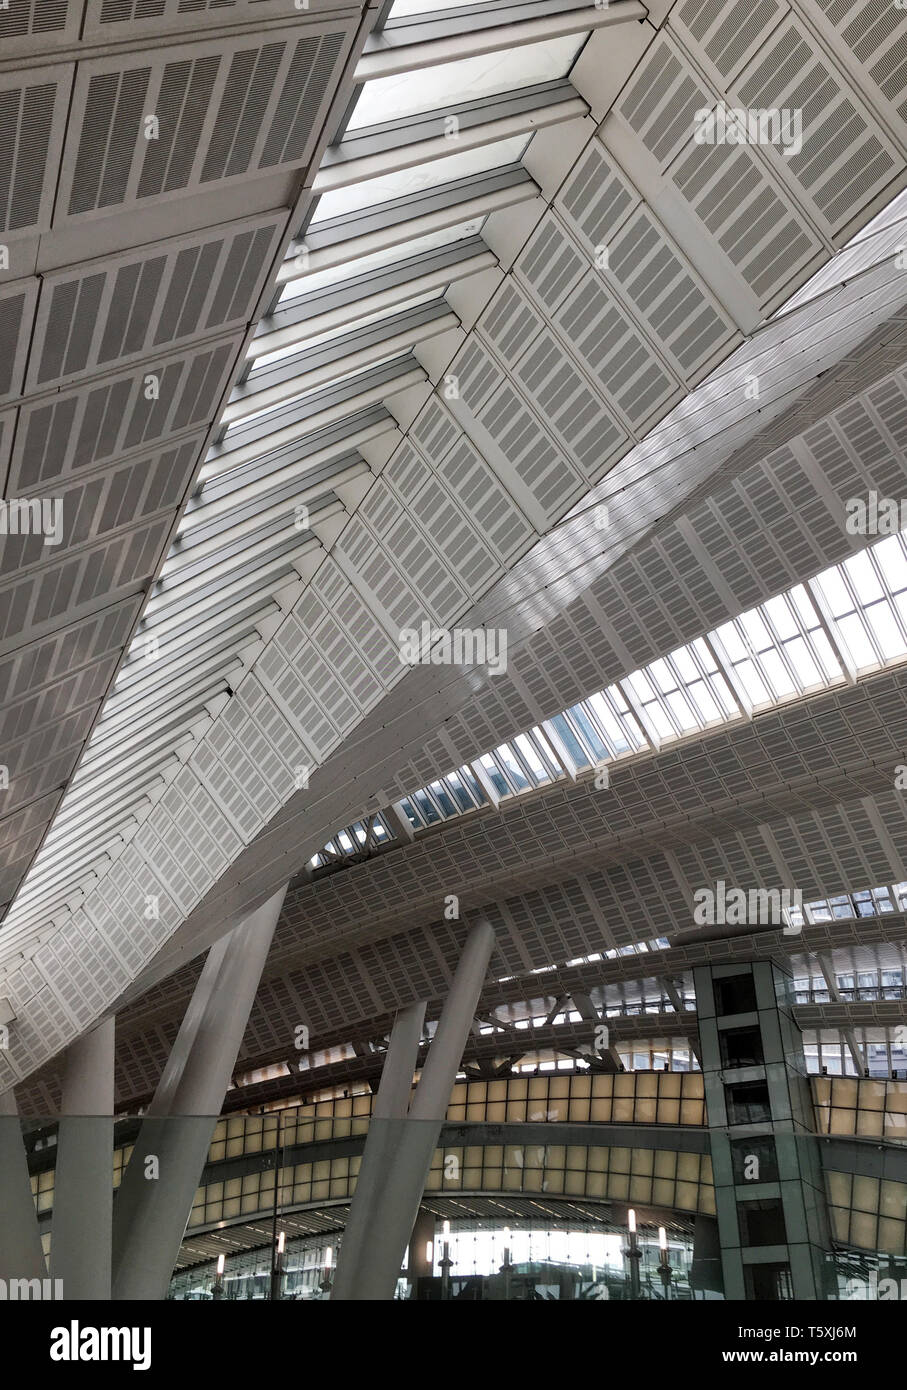 a roof of china hong kong speed train station Stock Photo